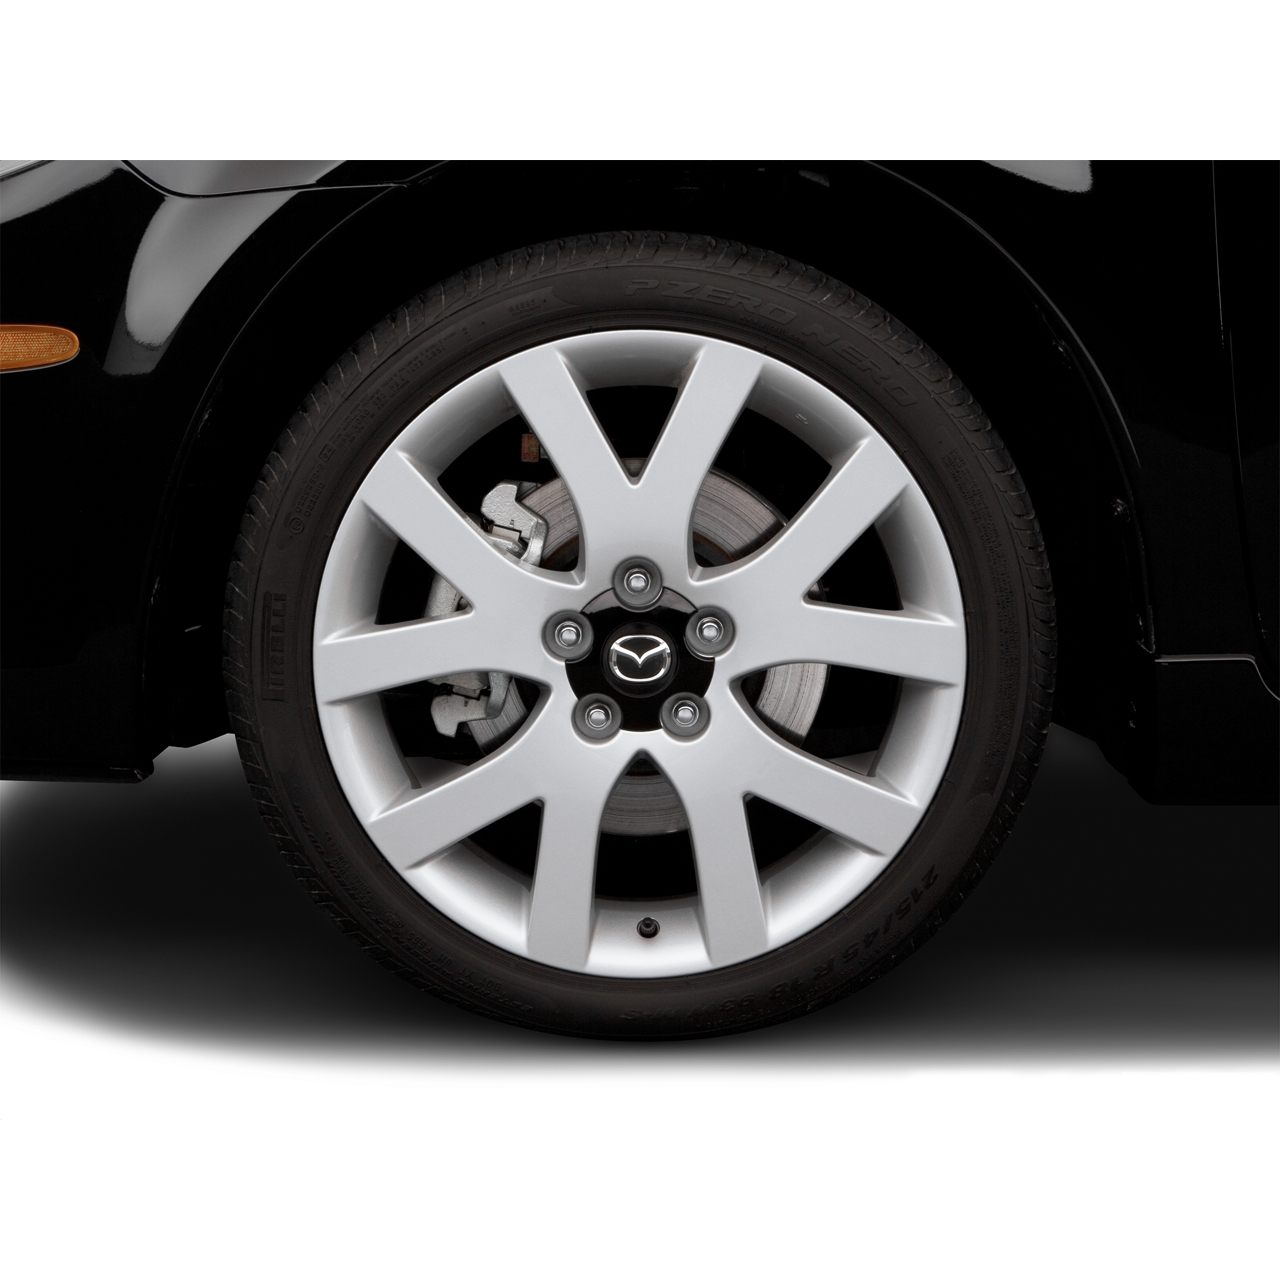 USED OEM Wheel Centre Caps | Mazda6 (2005-2008) - WHILE SUPPLIES LAST